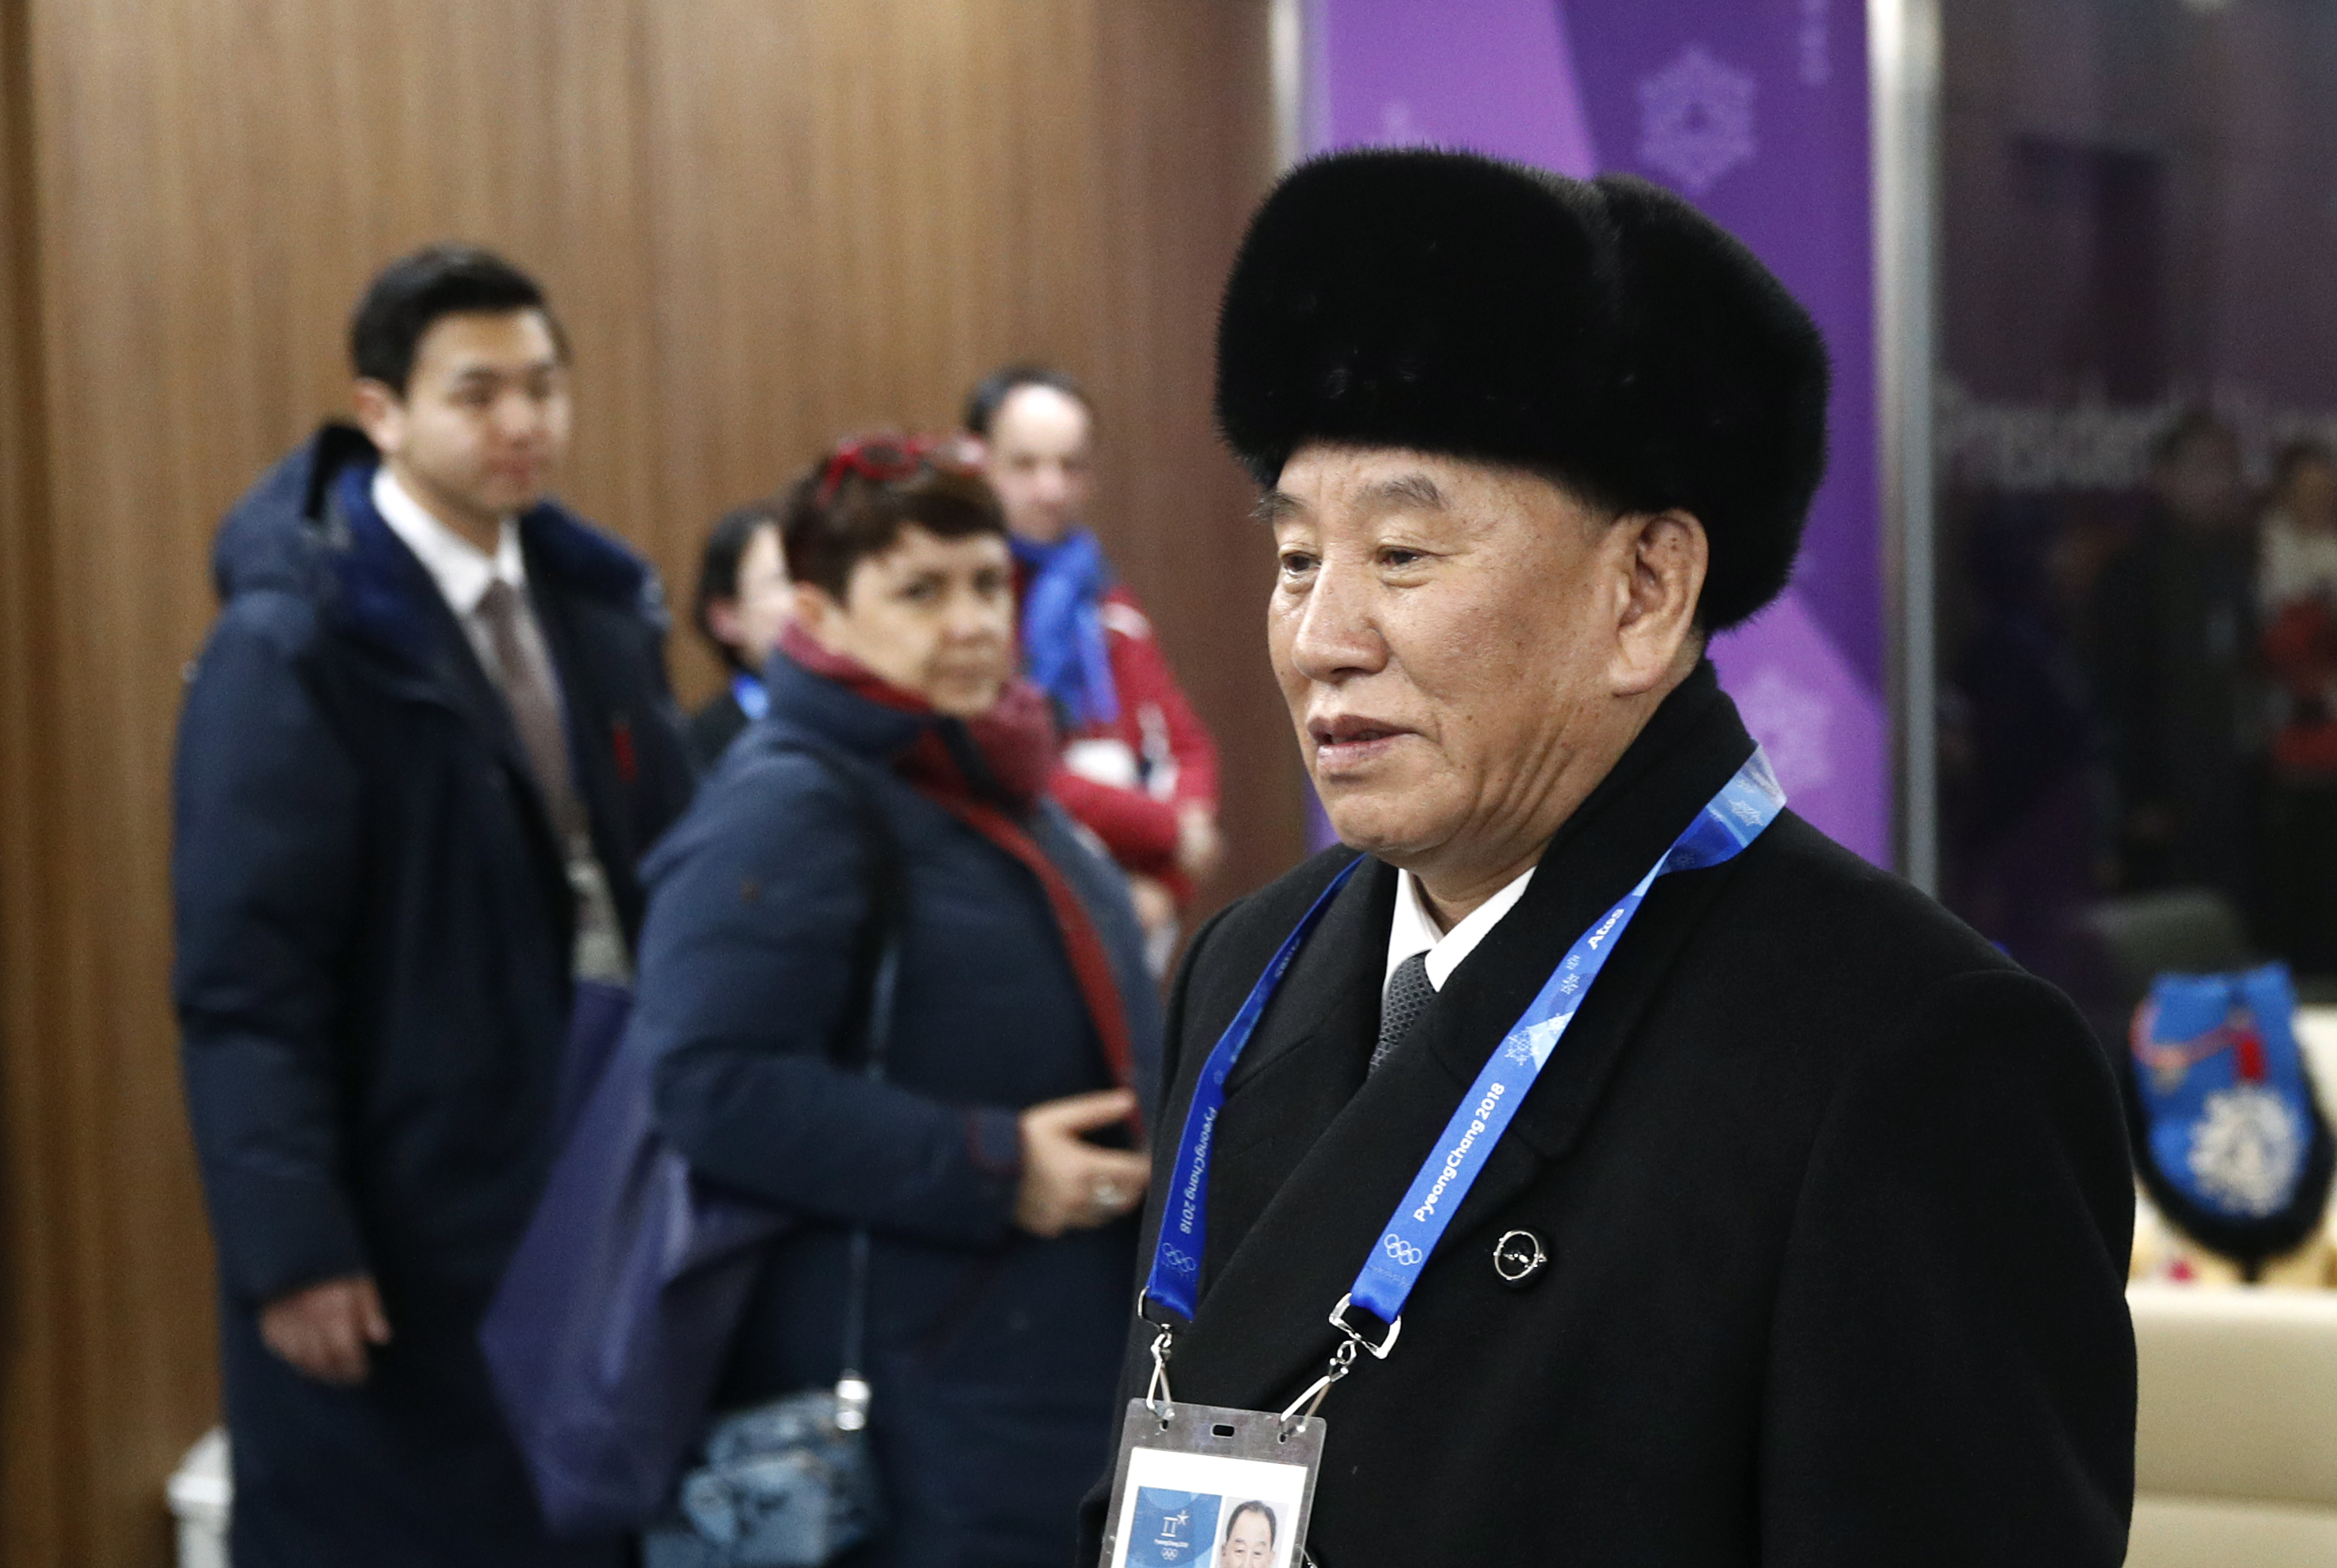 Kim Yong Chol, vice chairman of North Korea's ruling Workers' Party Central Committee, at the closing ceremony of the Pyeongchang 2018 Winter Olympic Games  on Feb. 25, 2018. (Patrick Semansky—AFP/Getty Images)